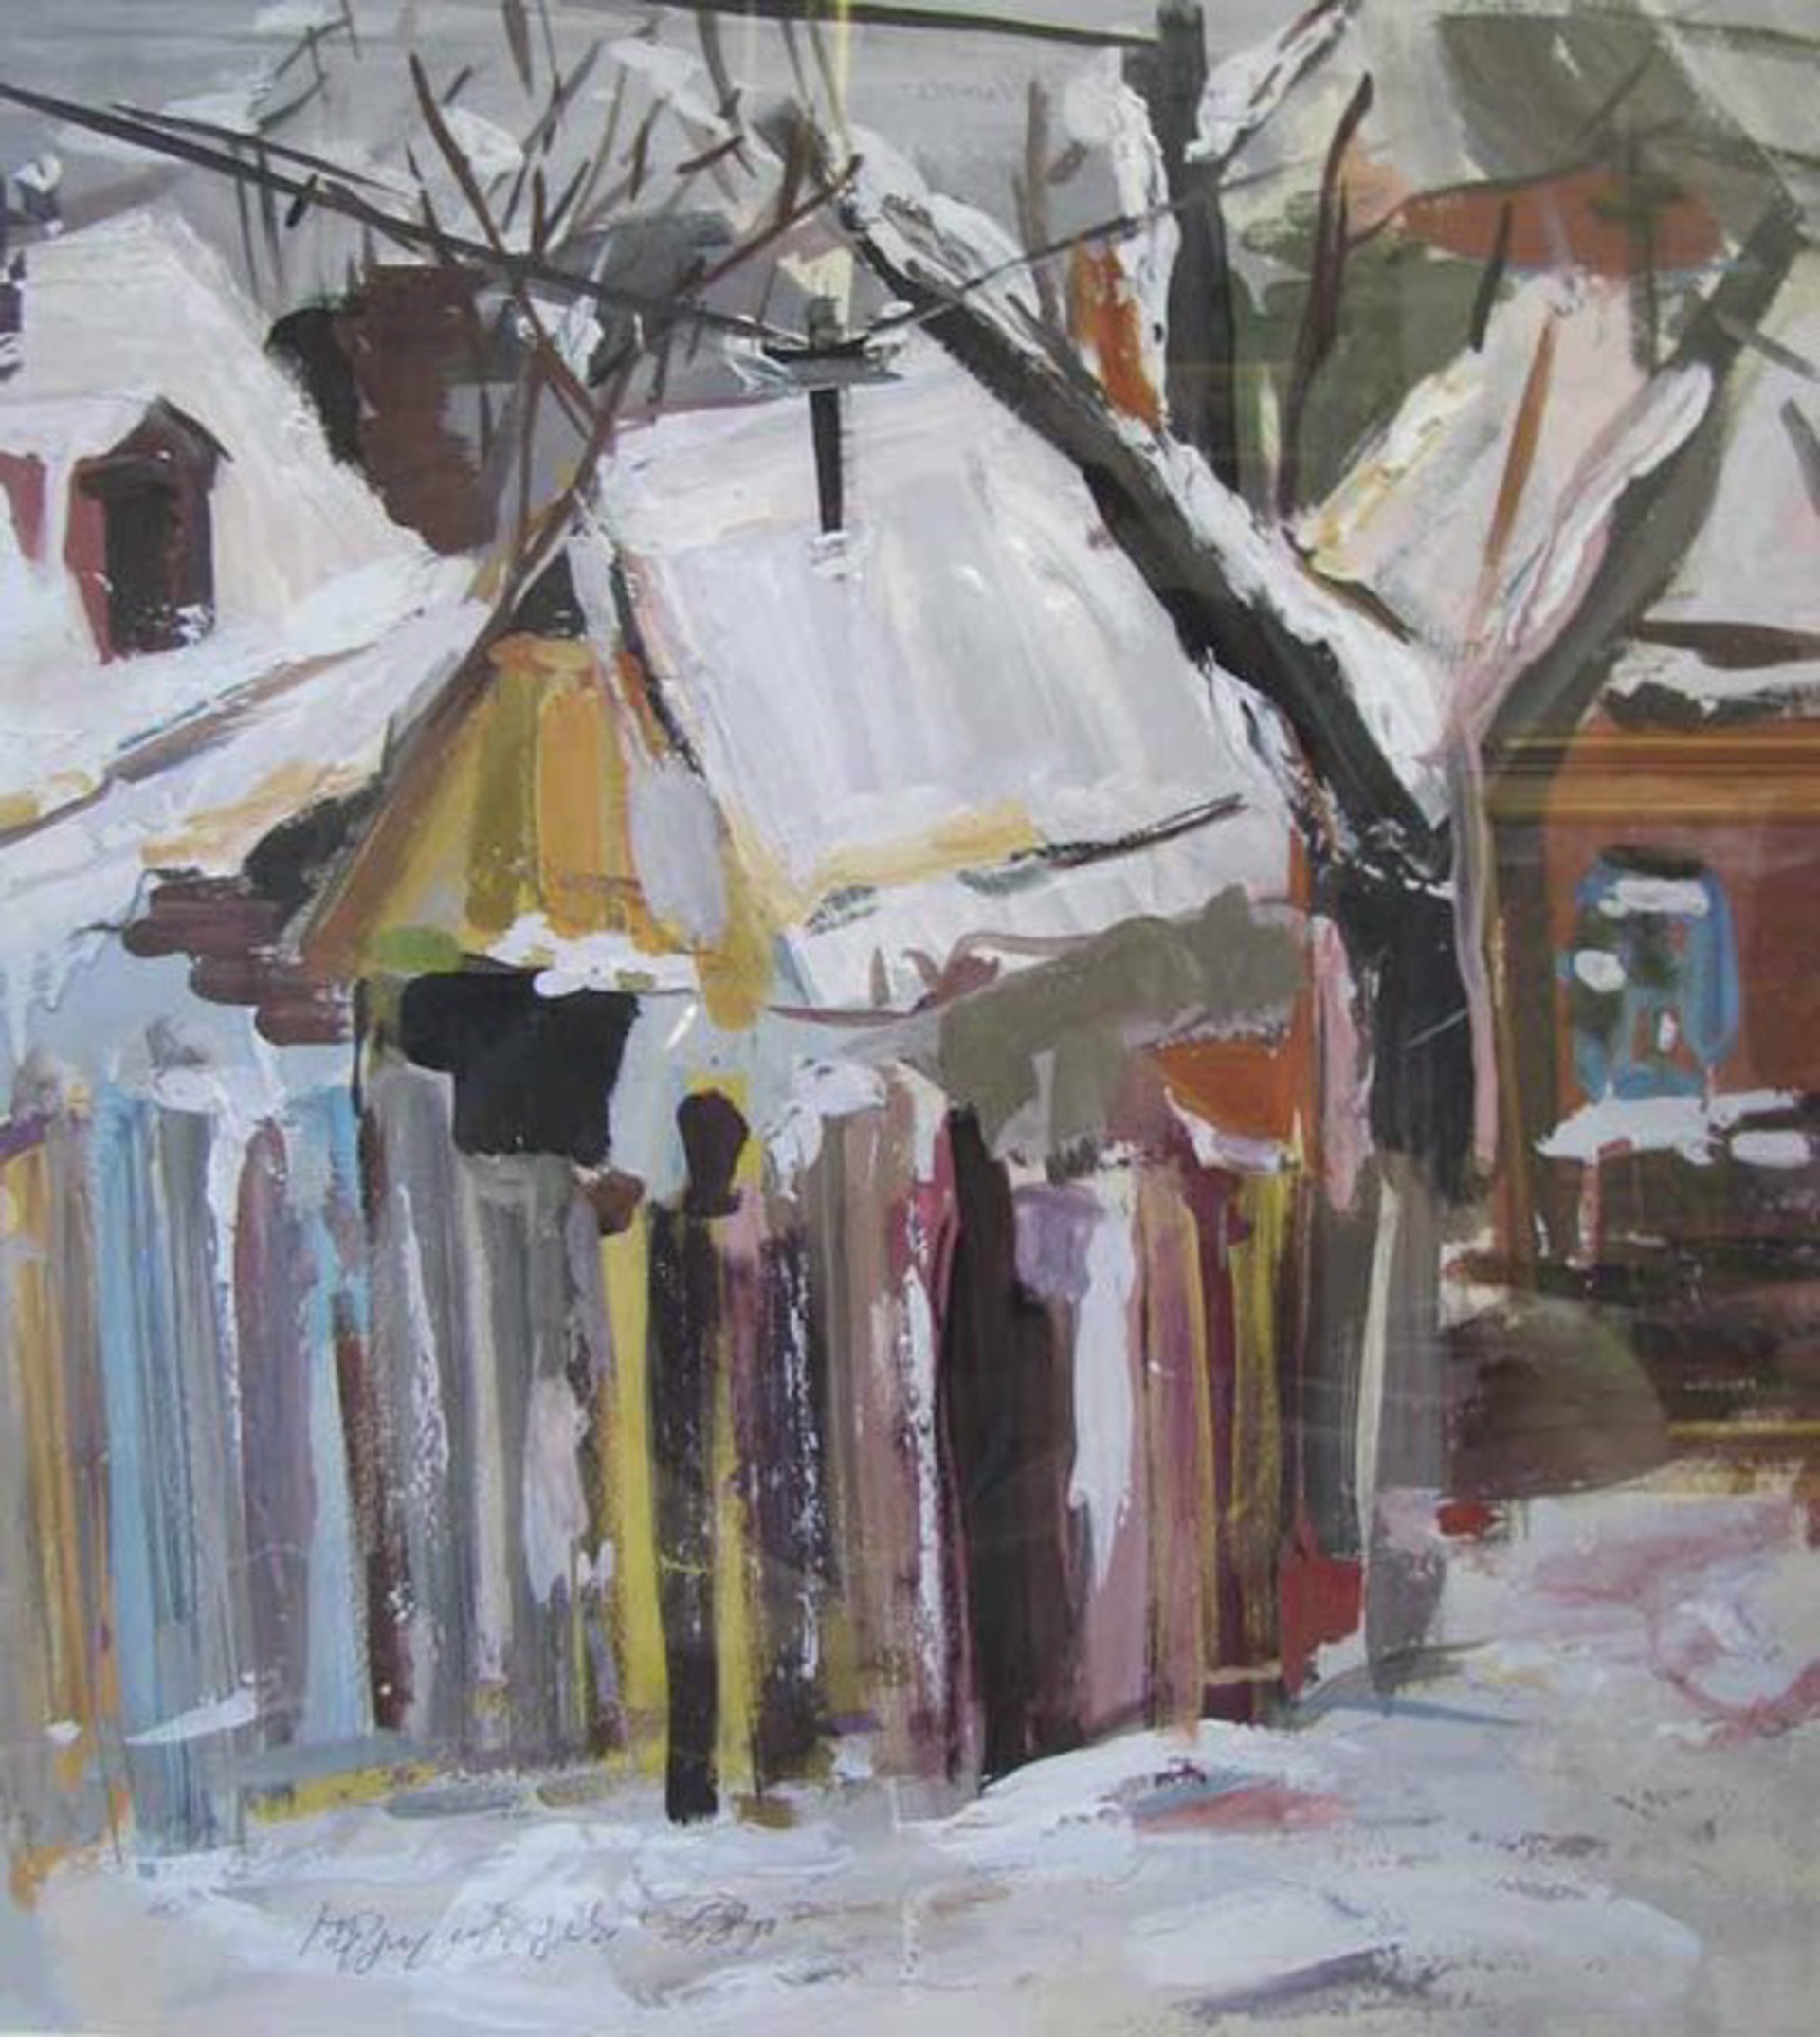 Houses in the Snow by Hachatur Gulamiryan